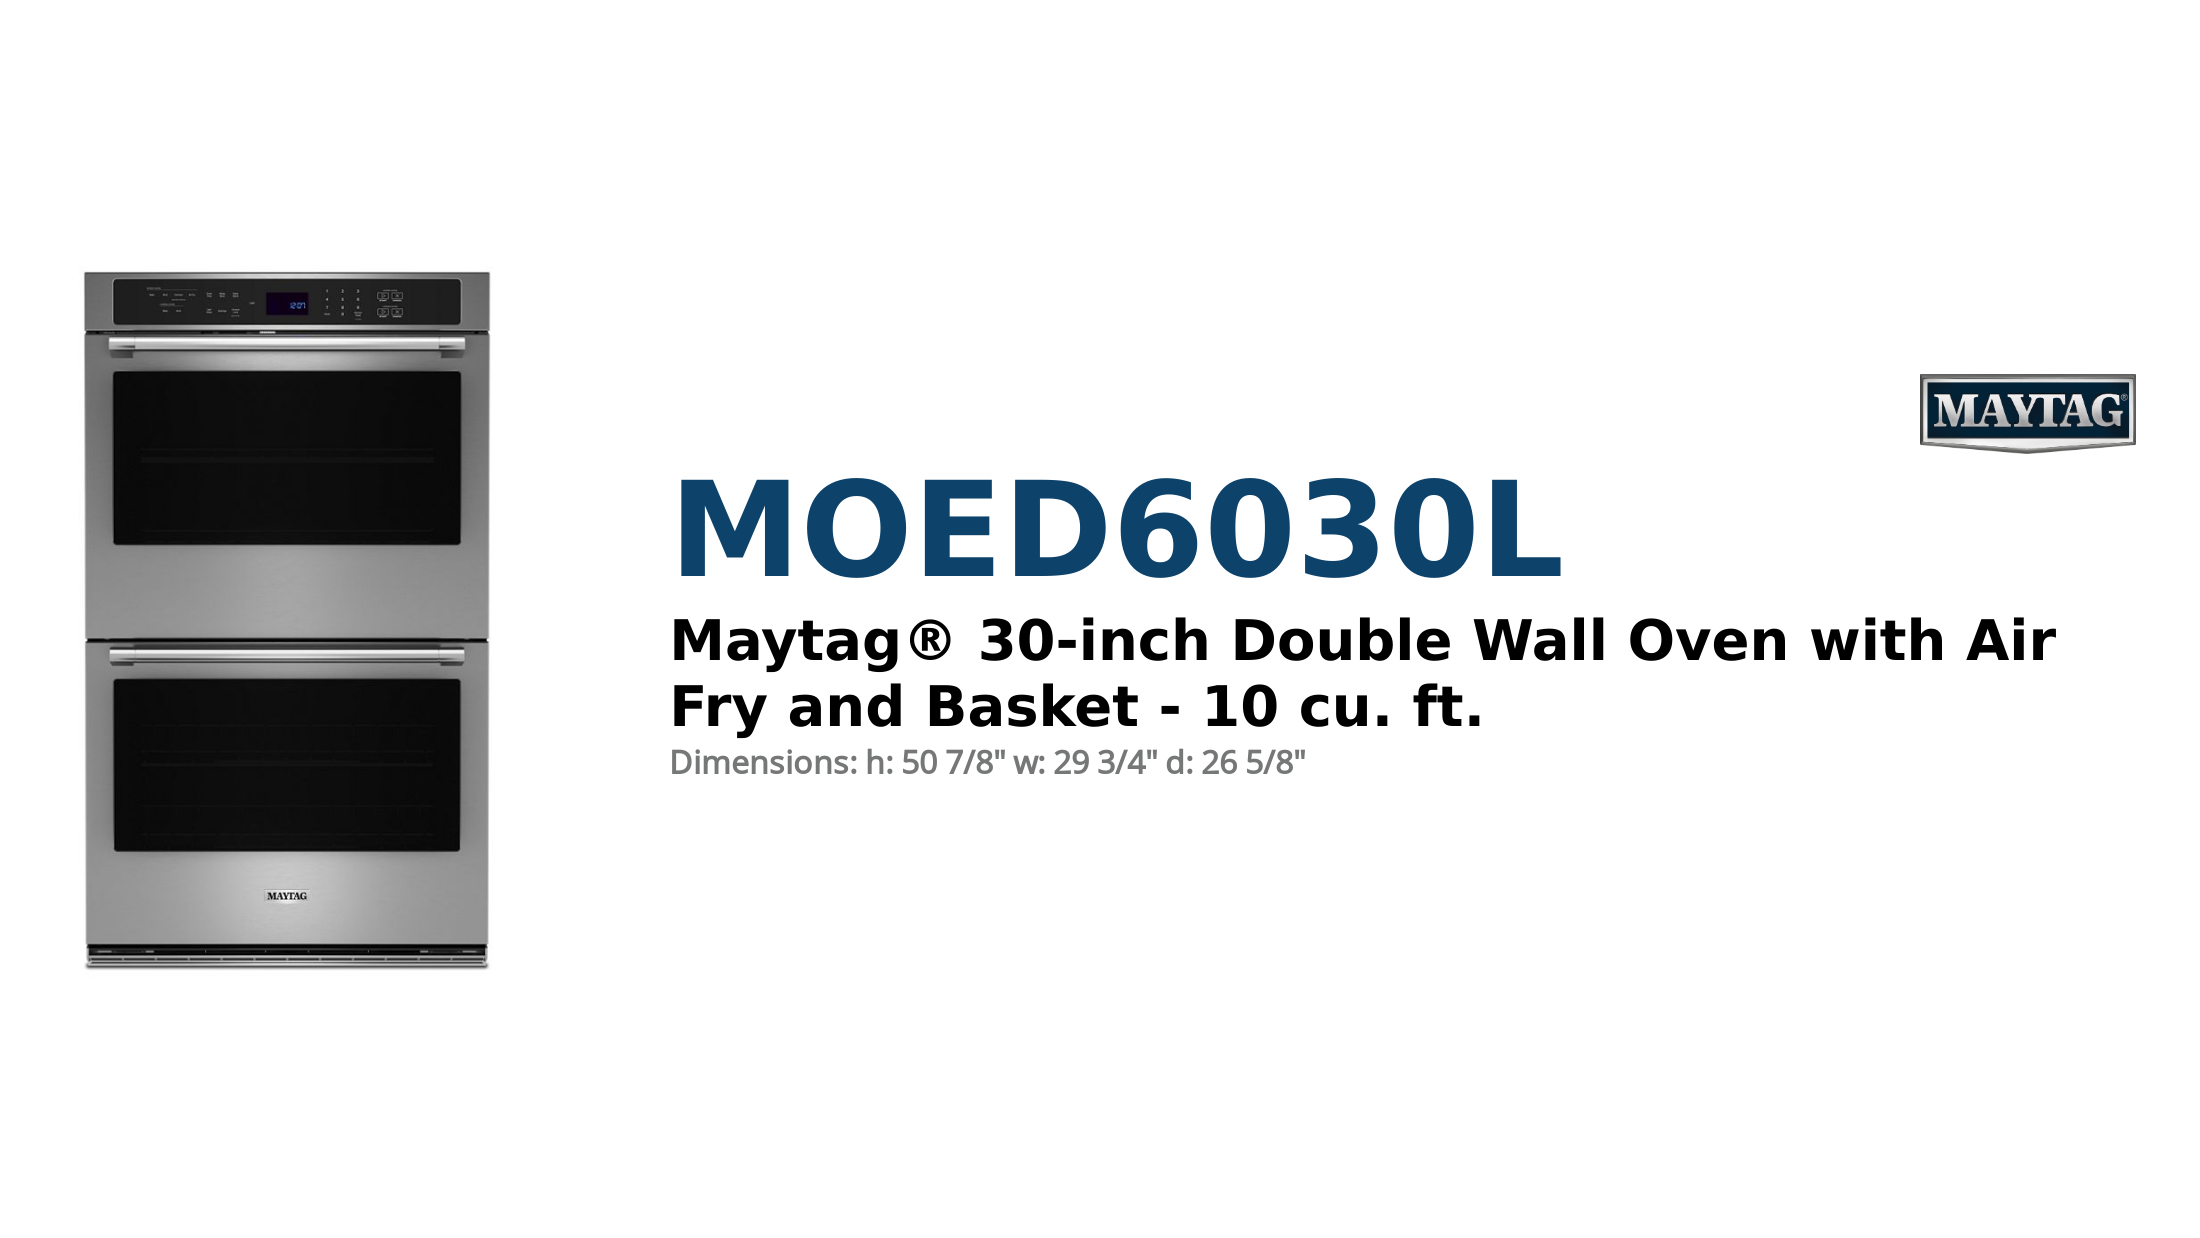 



MAYTAG® 30-INCH DOUBLE WALL OVEN WITH AIR FRY AND BASKET - 10 CU. FT.



